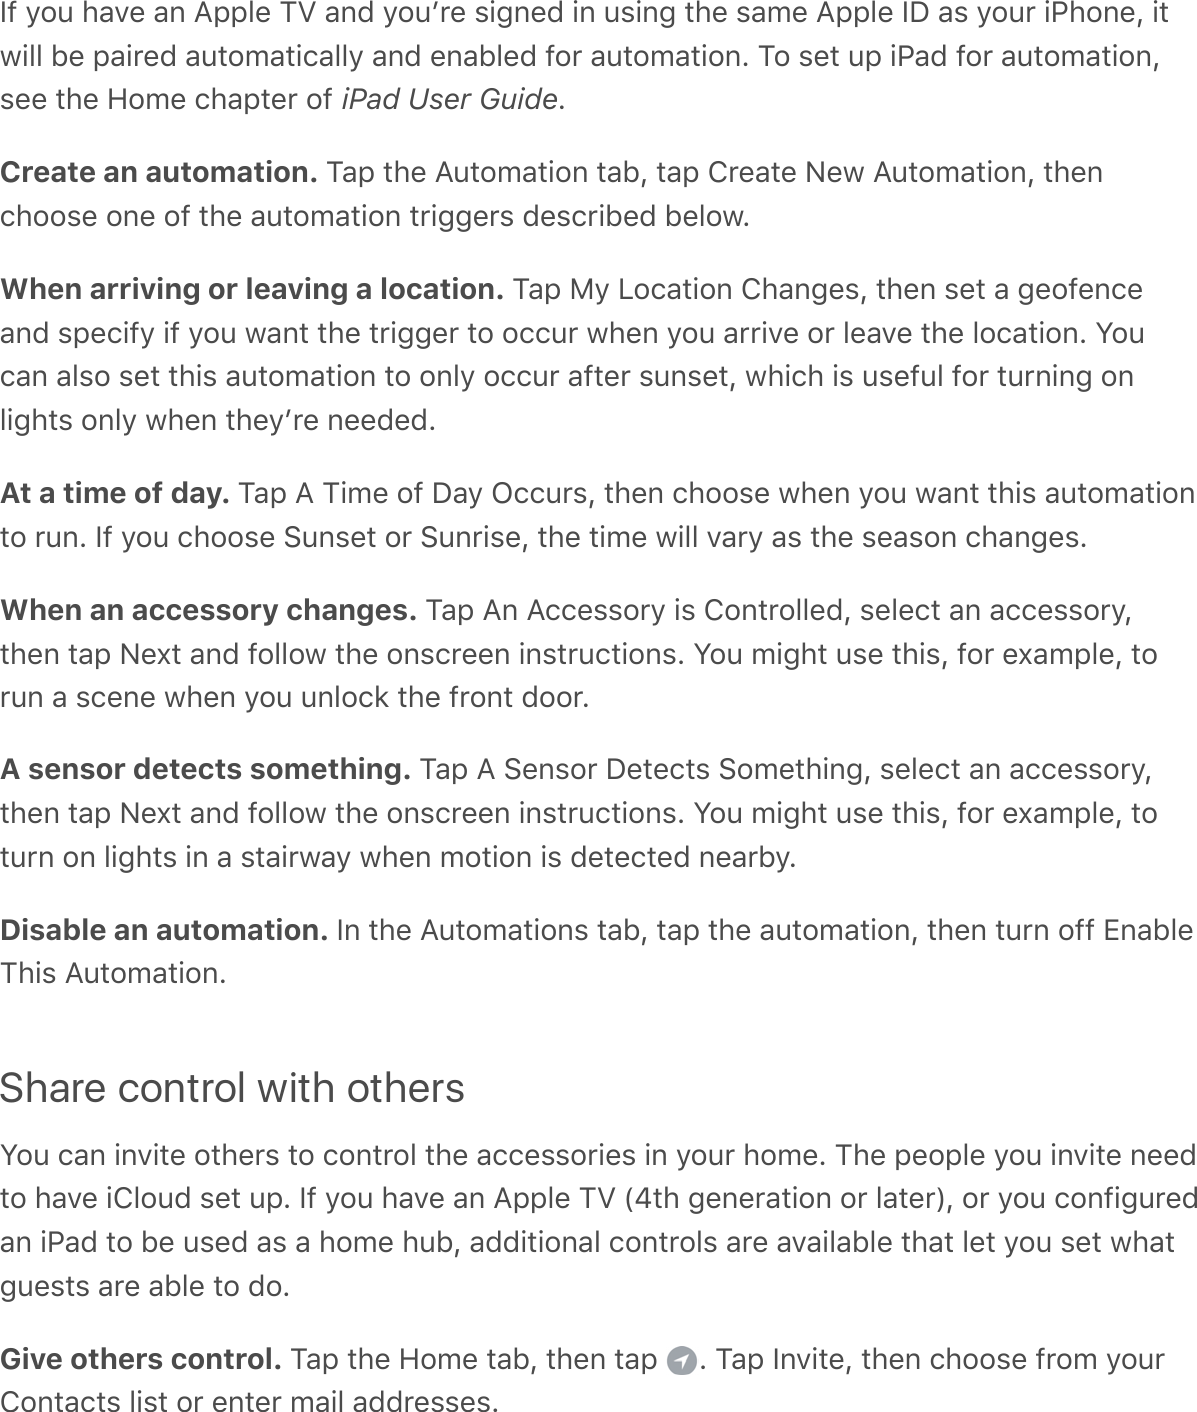 If you have an Apple TV and youʼre signed in using the same Apple ID as your iPhone, itwill be paired automatically and enabled for automation. To set up iPad for automation,see the Home chapter of iPad User Guide.Create an automation. Tap the Automation tab, tap Create New Automation, thenchoose one of the automation triggers described below.When arriving or leaving a location. Tap My Location Changes, then set a geofenceand specify if you want the trigger to occur when you arrive or leave the location. Youcan also set this automation to only occur after sunset, which is useful for turning onlights only when theyʼre needed.At a time of day. Tap A Time of Day Occurs, then choose when you want this automationto run. If you choose Sunset or Sunrise, the time will vary as the season changes.When an accessory changes. Tap An Accessory is Controlled, select an accessory,then tap Next and follow the onscreen instructions. You might use this, for example, torun a scene when you unlock the front door.A sensor detects something. Tap A Sensor Detects Something, select an accessory,then tap Next and follow the onscreen instructions. You might use this, for example, toturn on lights in a stairway when motion is detected nearby.Disable an automation. In the Automations tab, tap the automation, then turn off EnableThis Automation.Share control with othersYou can invite others to control the accessories in your home. The people you invite needto have iCloud set up. If you have an Apple TV (4th generation or later), or you configuredan iPad to be used as a home hub, additional controls are available that let you set whatguests are able to do.Give others control. Tap the Home tab, then tap  . Tap Invite, then choose from yourContacts list or enter mail addresses.